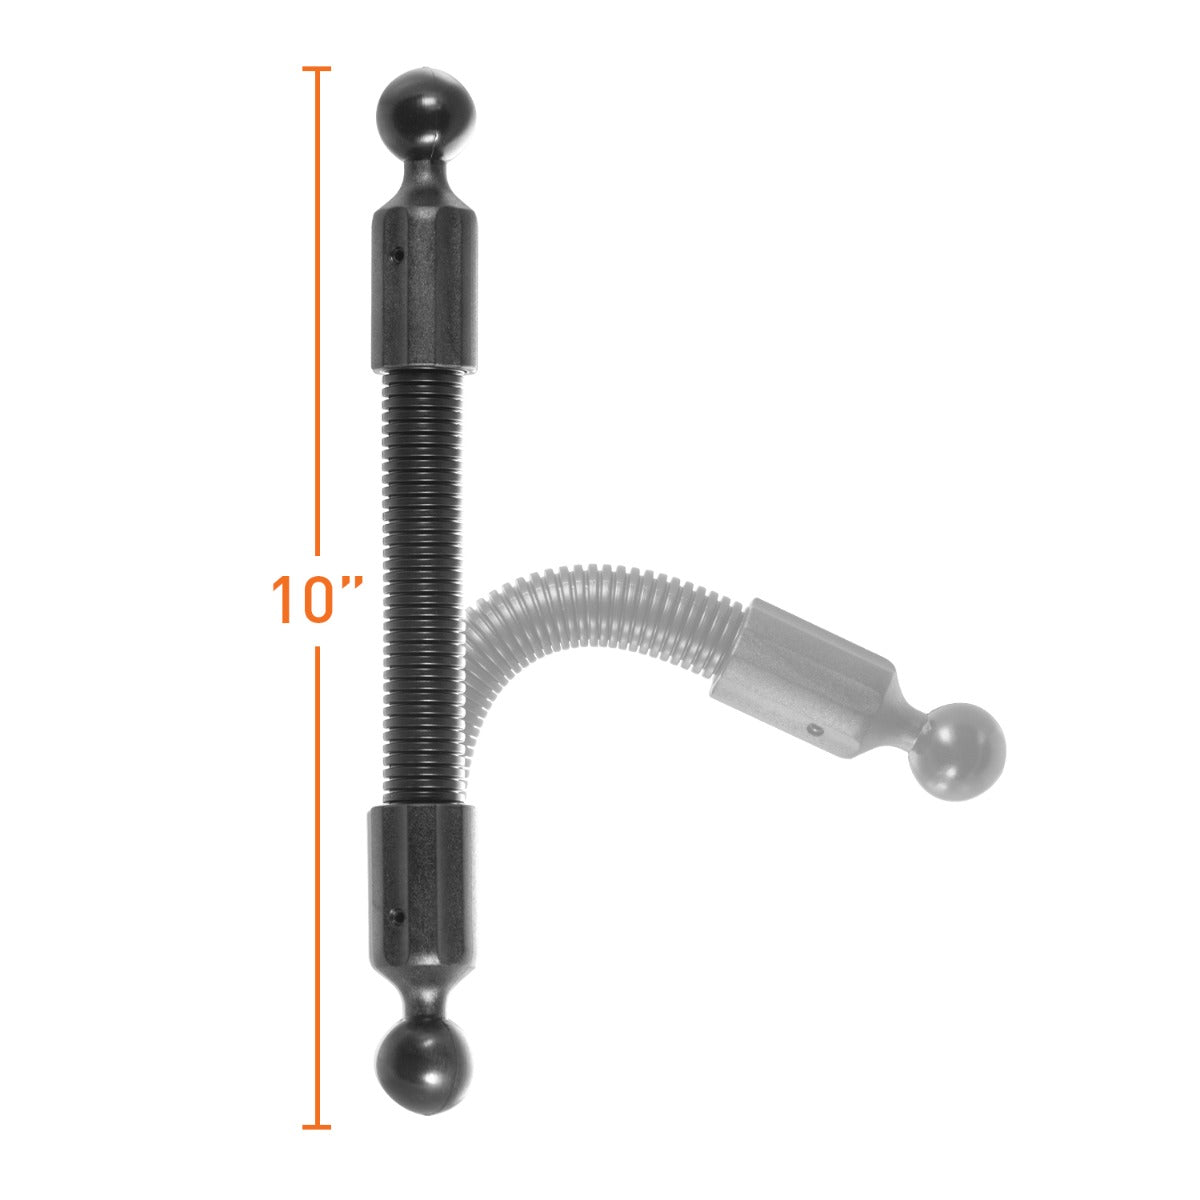 iBOLT™ (10 inch) 25mm / 1 inch to 25mm / 1 inch Flexible Extension Ball Adapter